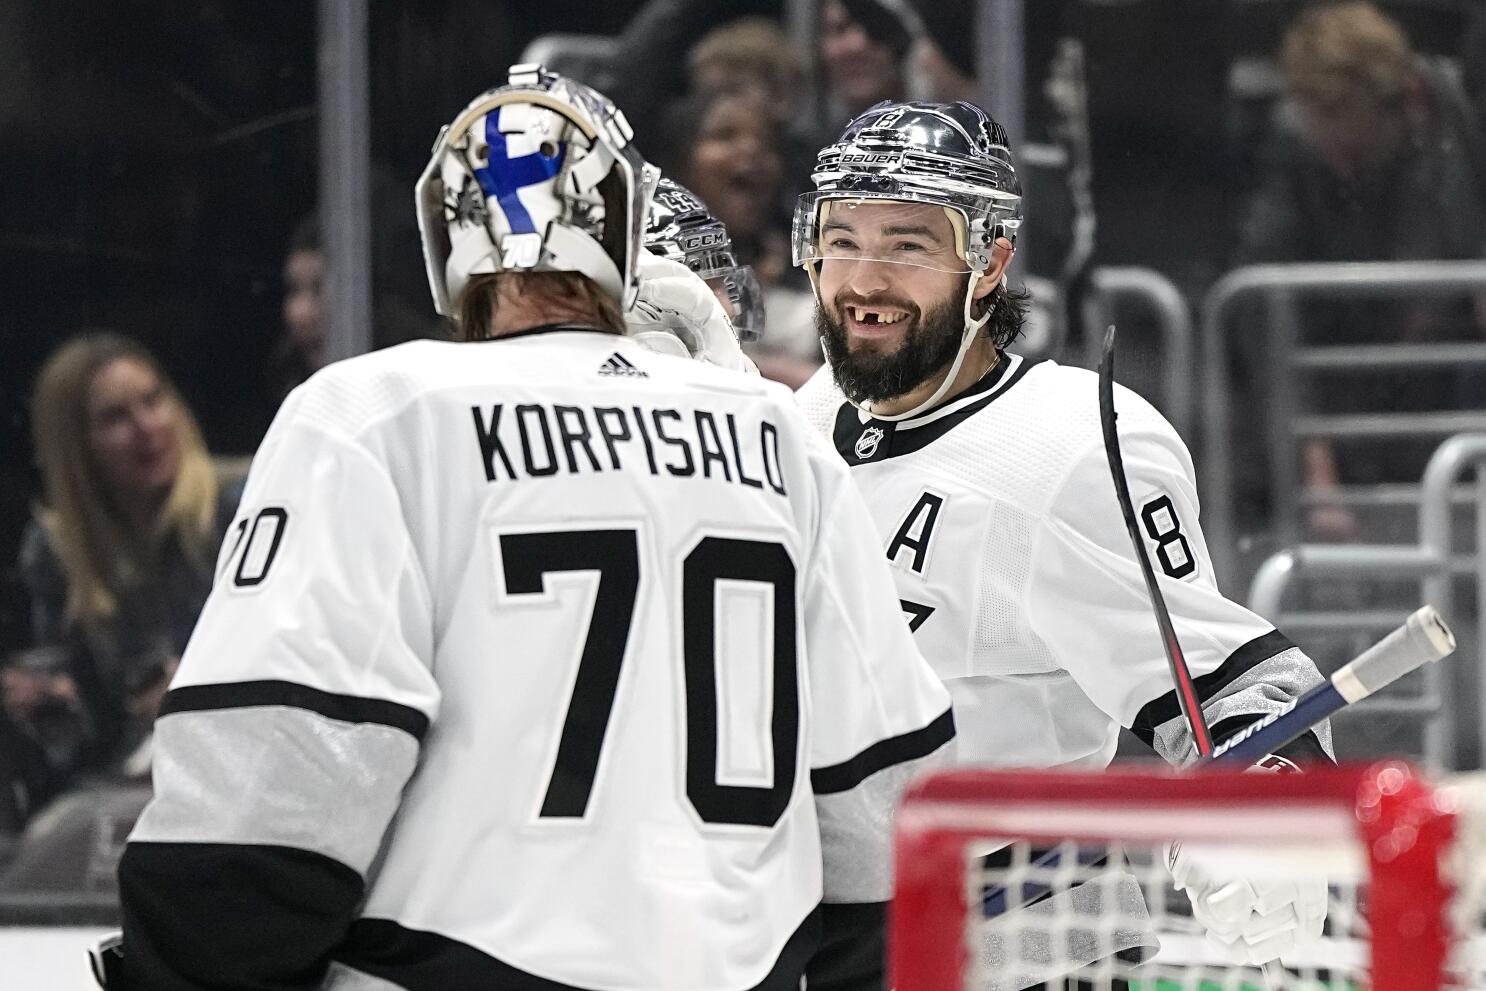 Kings' Doughty eager to battle McDavid, Oilers in playoffs